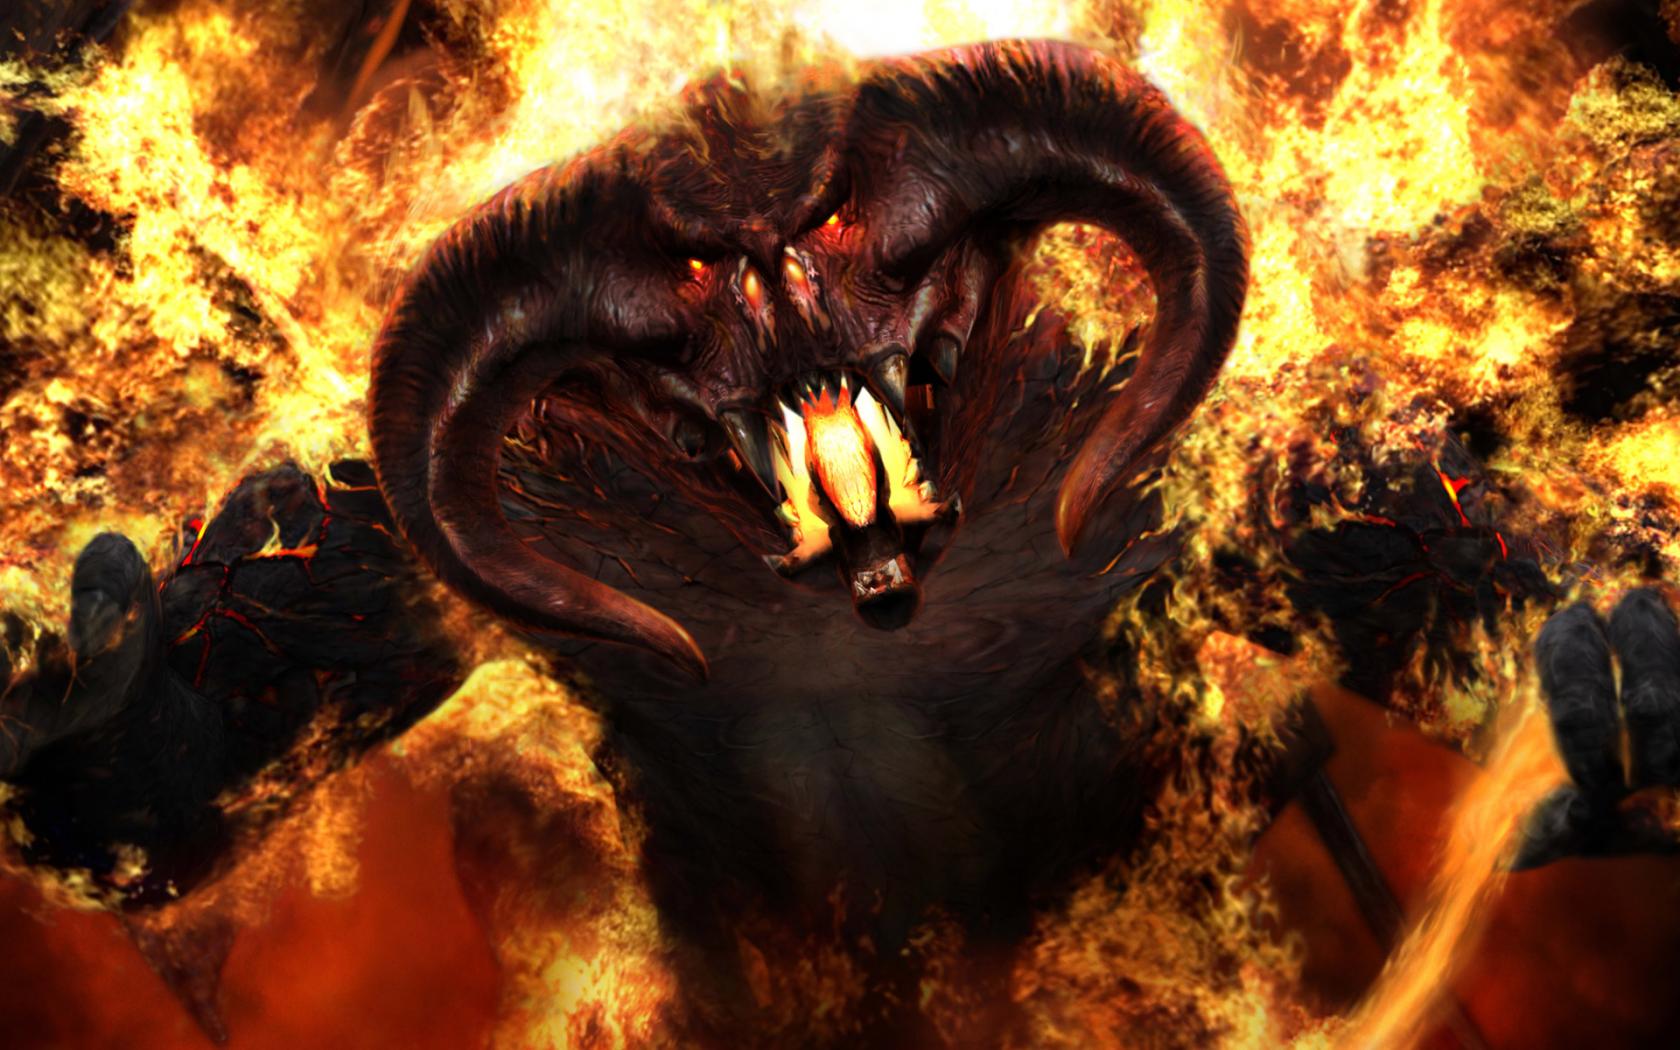 balrog, Demons, The, Lord, Of, The, Rings, The, Fellowship, Of, The, Ring Wallpaper